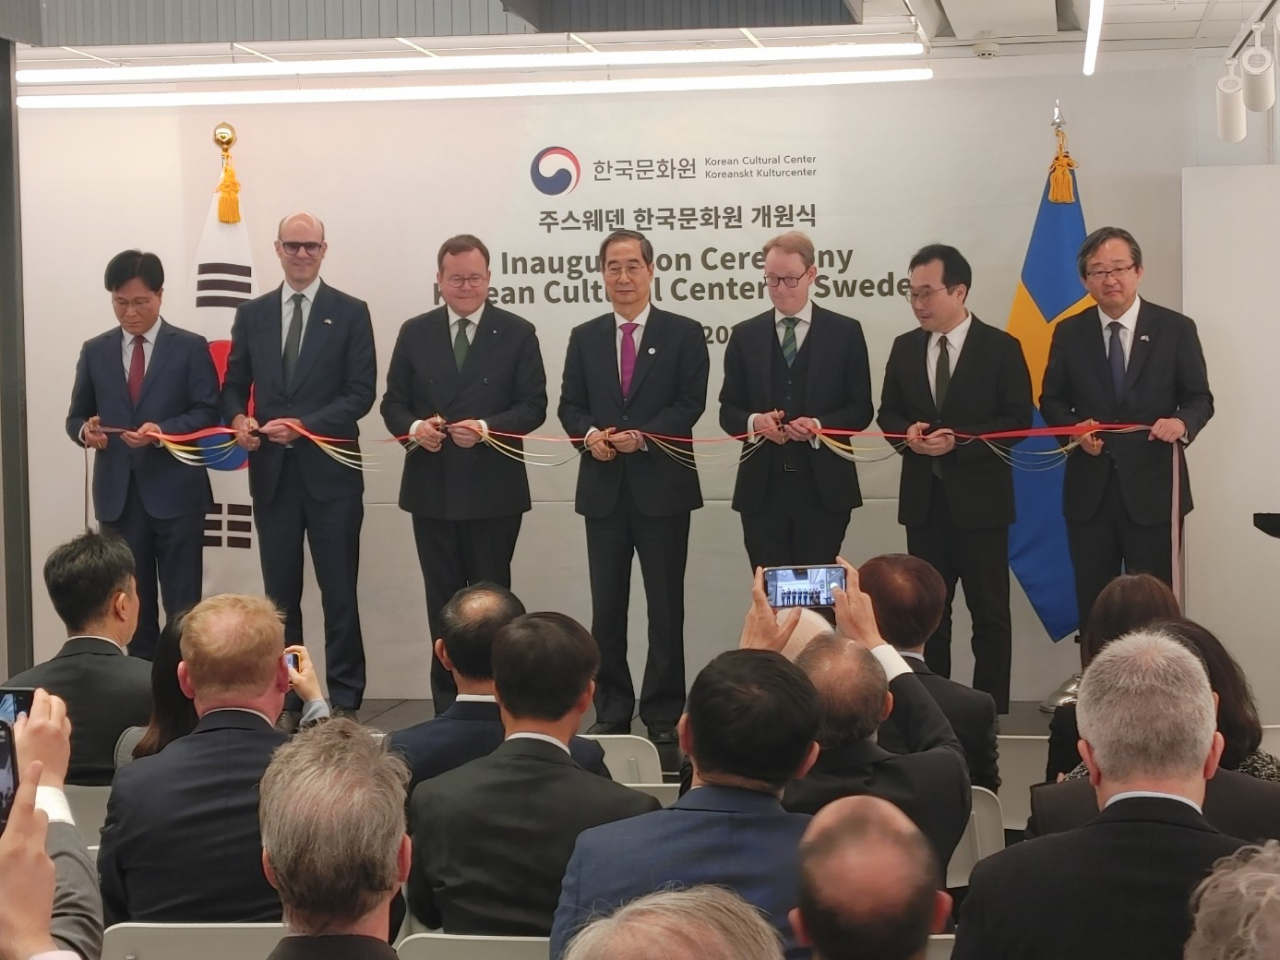 From left: Korean Culture and Information Service Director Kim Jang-ho, Swedish Ambassador to Korea Daniel Wolven, Stockholm City Council President Olle Burell, South Korean Prime Minister Han Duck-soo, Swedish Minister of Foreign Affairs Tobias Billstrom, South Korean Second Vice Minister of Foreign Affairs Lee Do-hoon and Korean Ambassador to Sweden Chung-Byung-won pose at a ribbon-cutting ceremony for the Korean Cultural Center Stockholm in Sweden's capital on Monday. (South Korean Culture Ministry)